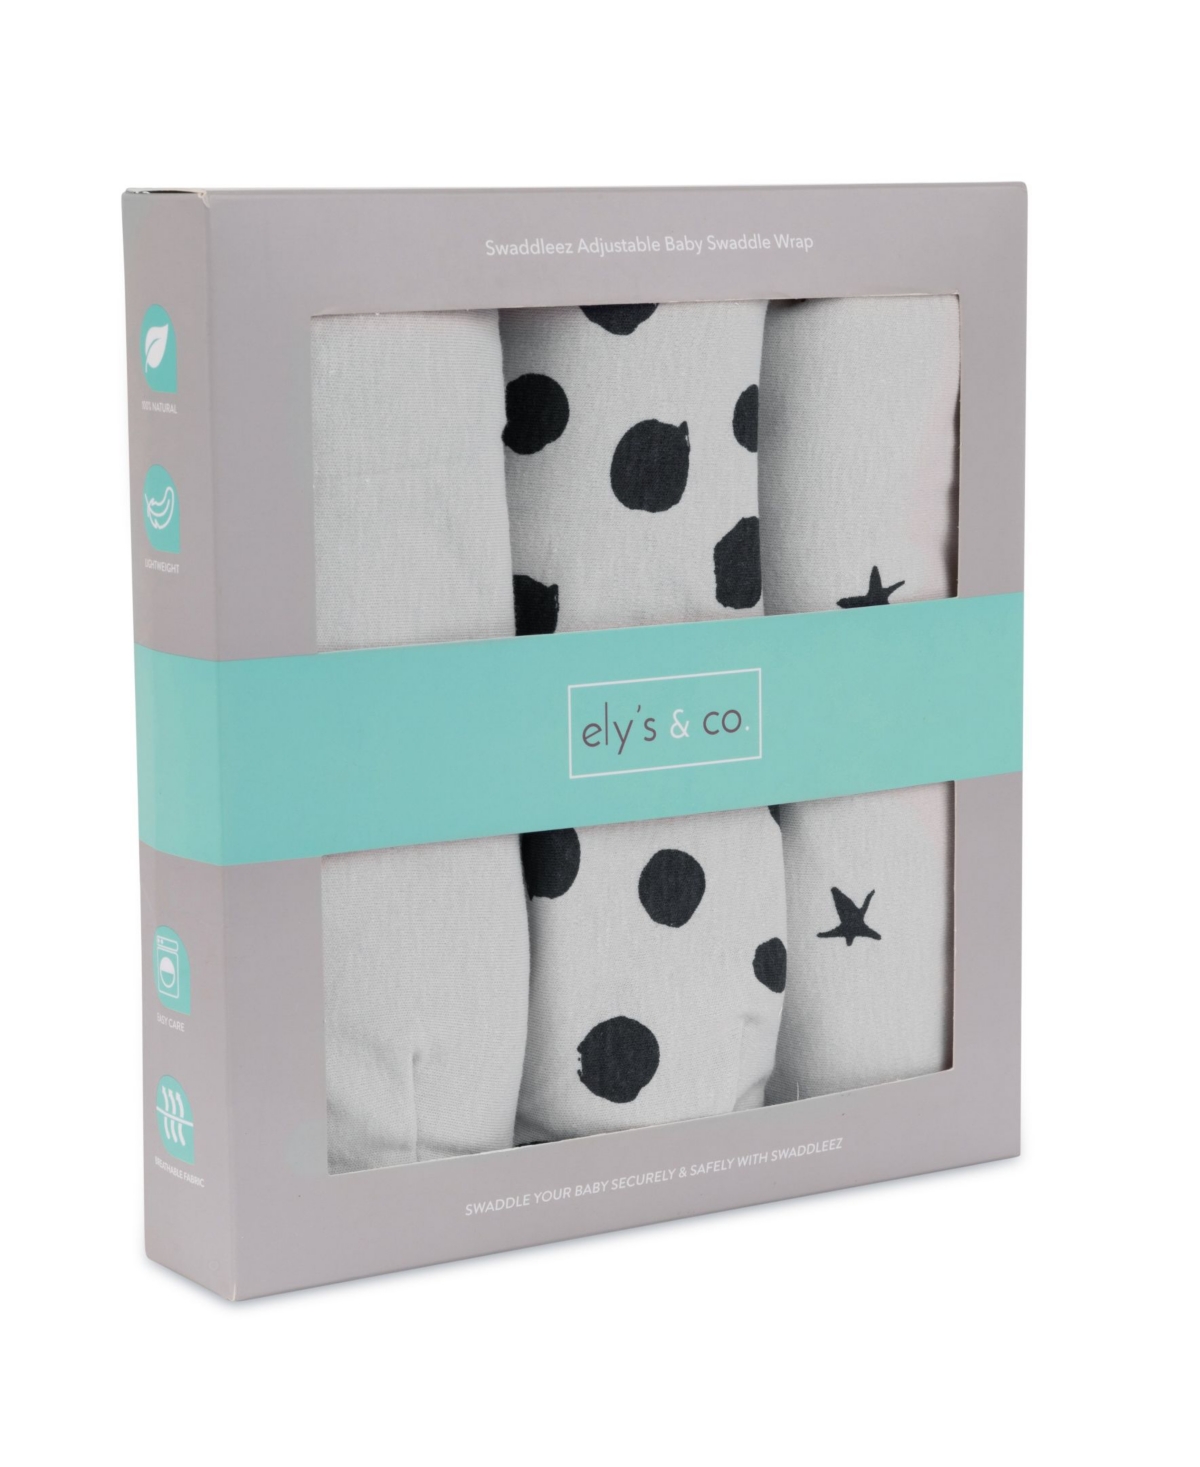 Ely's & Co. Baby Boys Or Baby Girls Adjustable Swaddle Large 3 Pack In Black And White